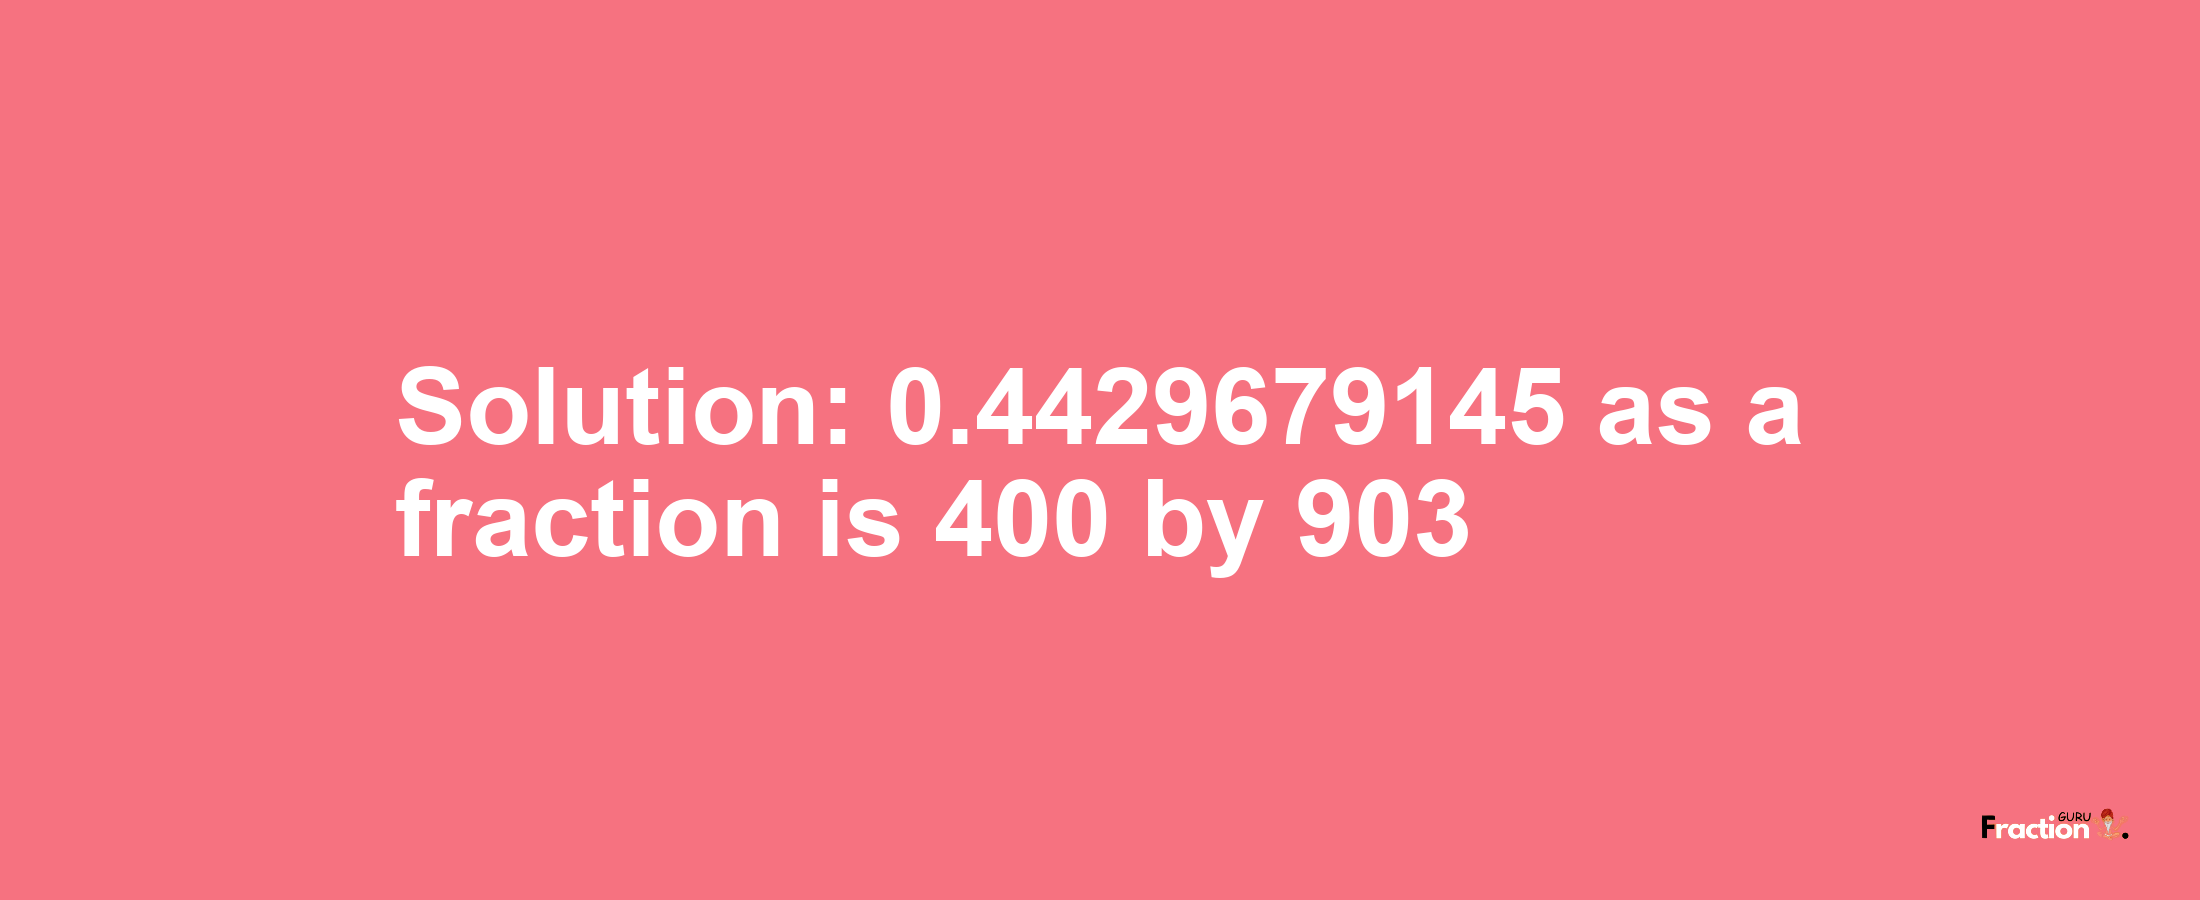 Solution:0.4429679145 as a fraction is 400/903